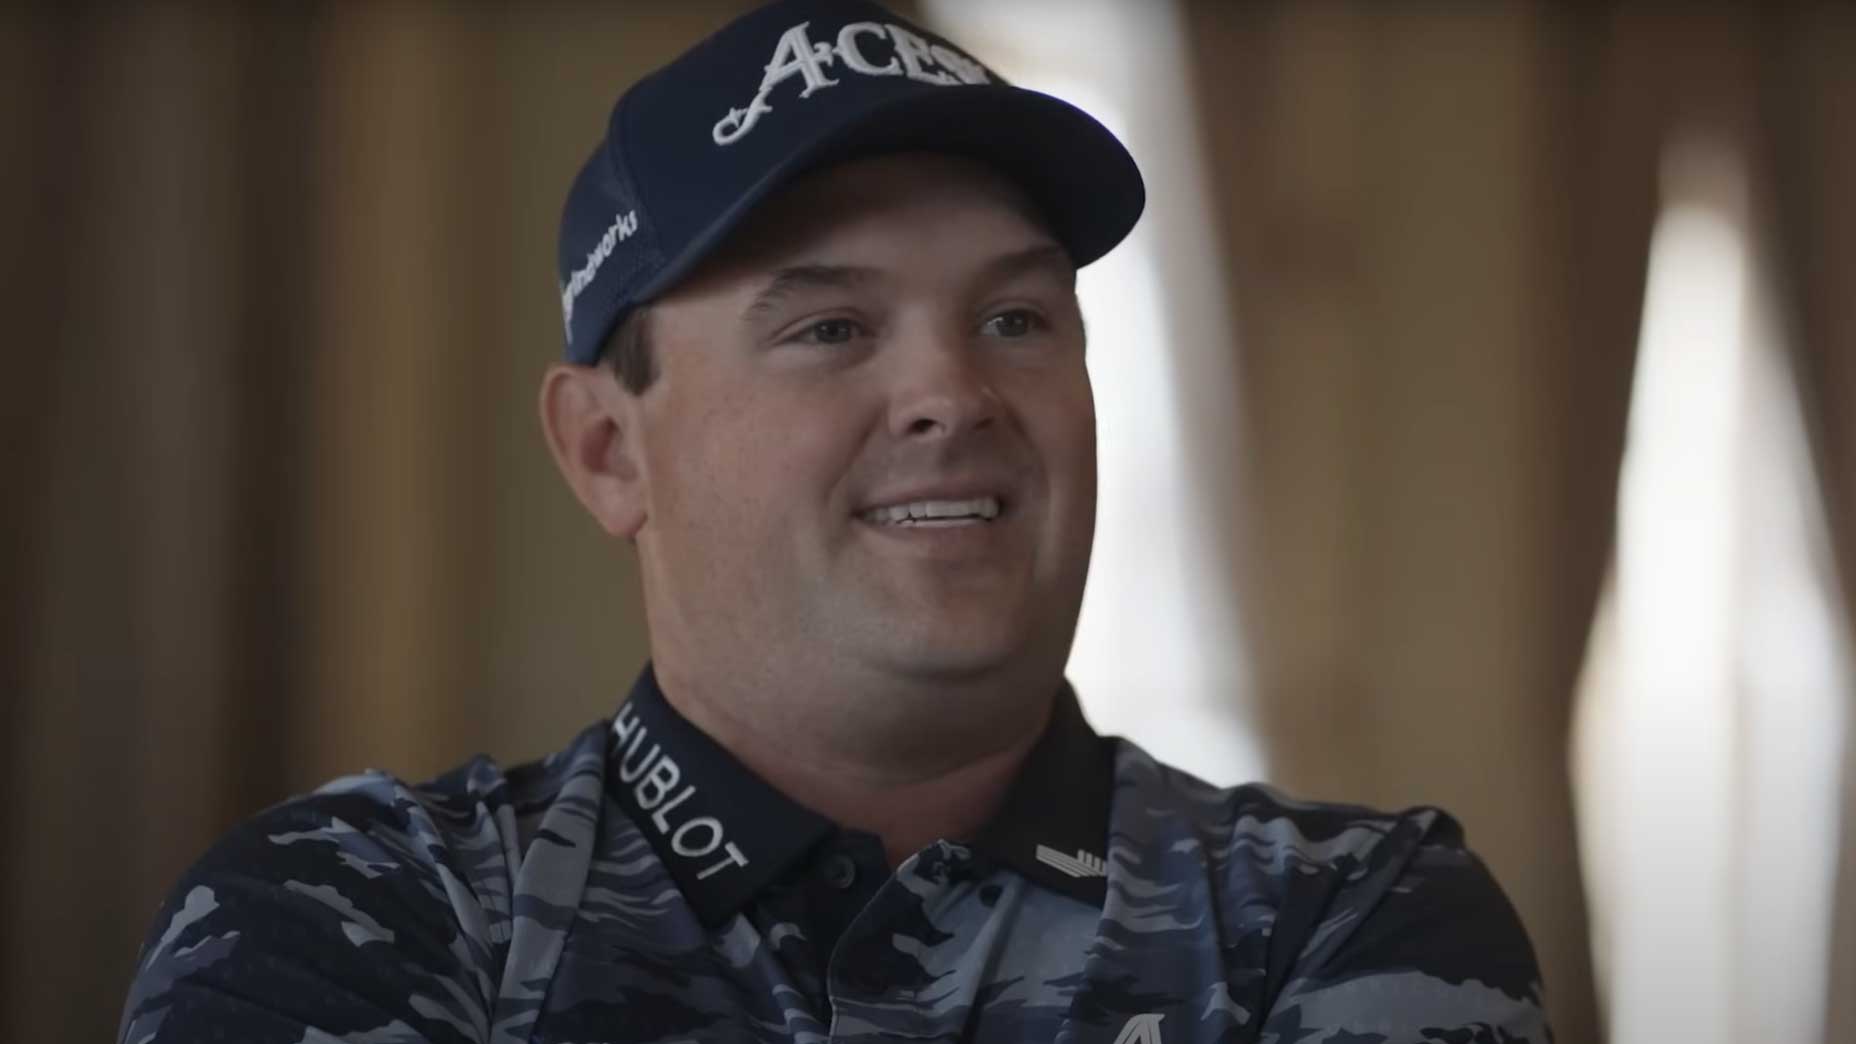 Patrick Reed tells his side: On breakthroughs, controversies and embracing himself